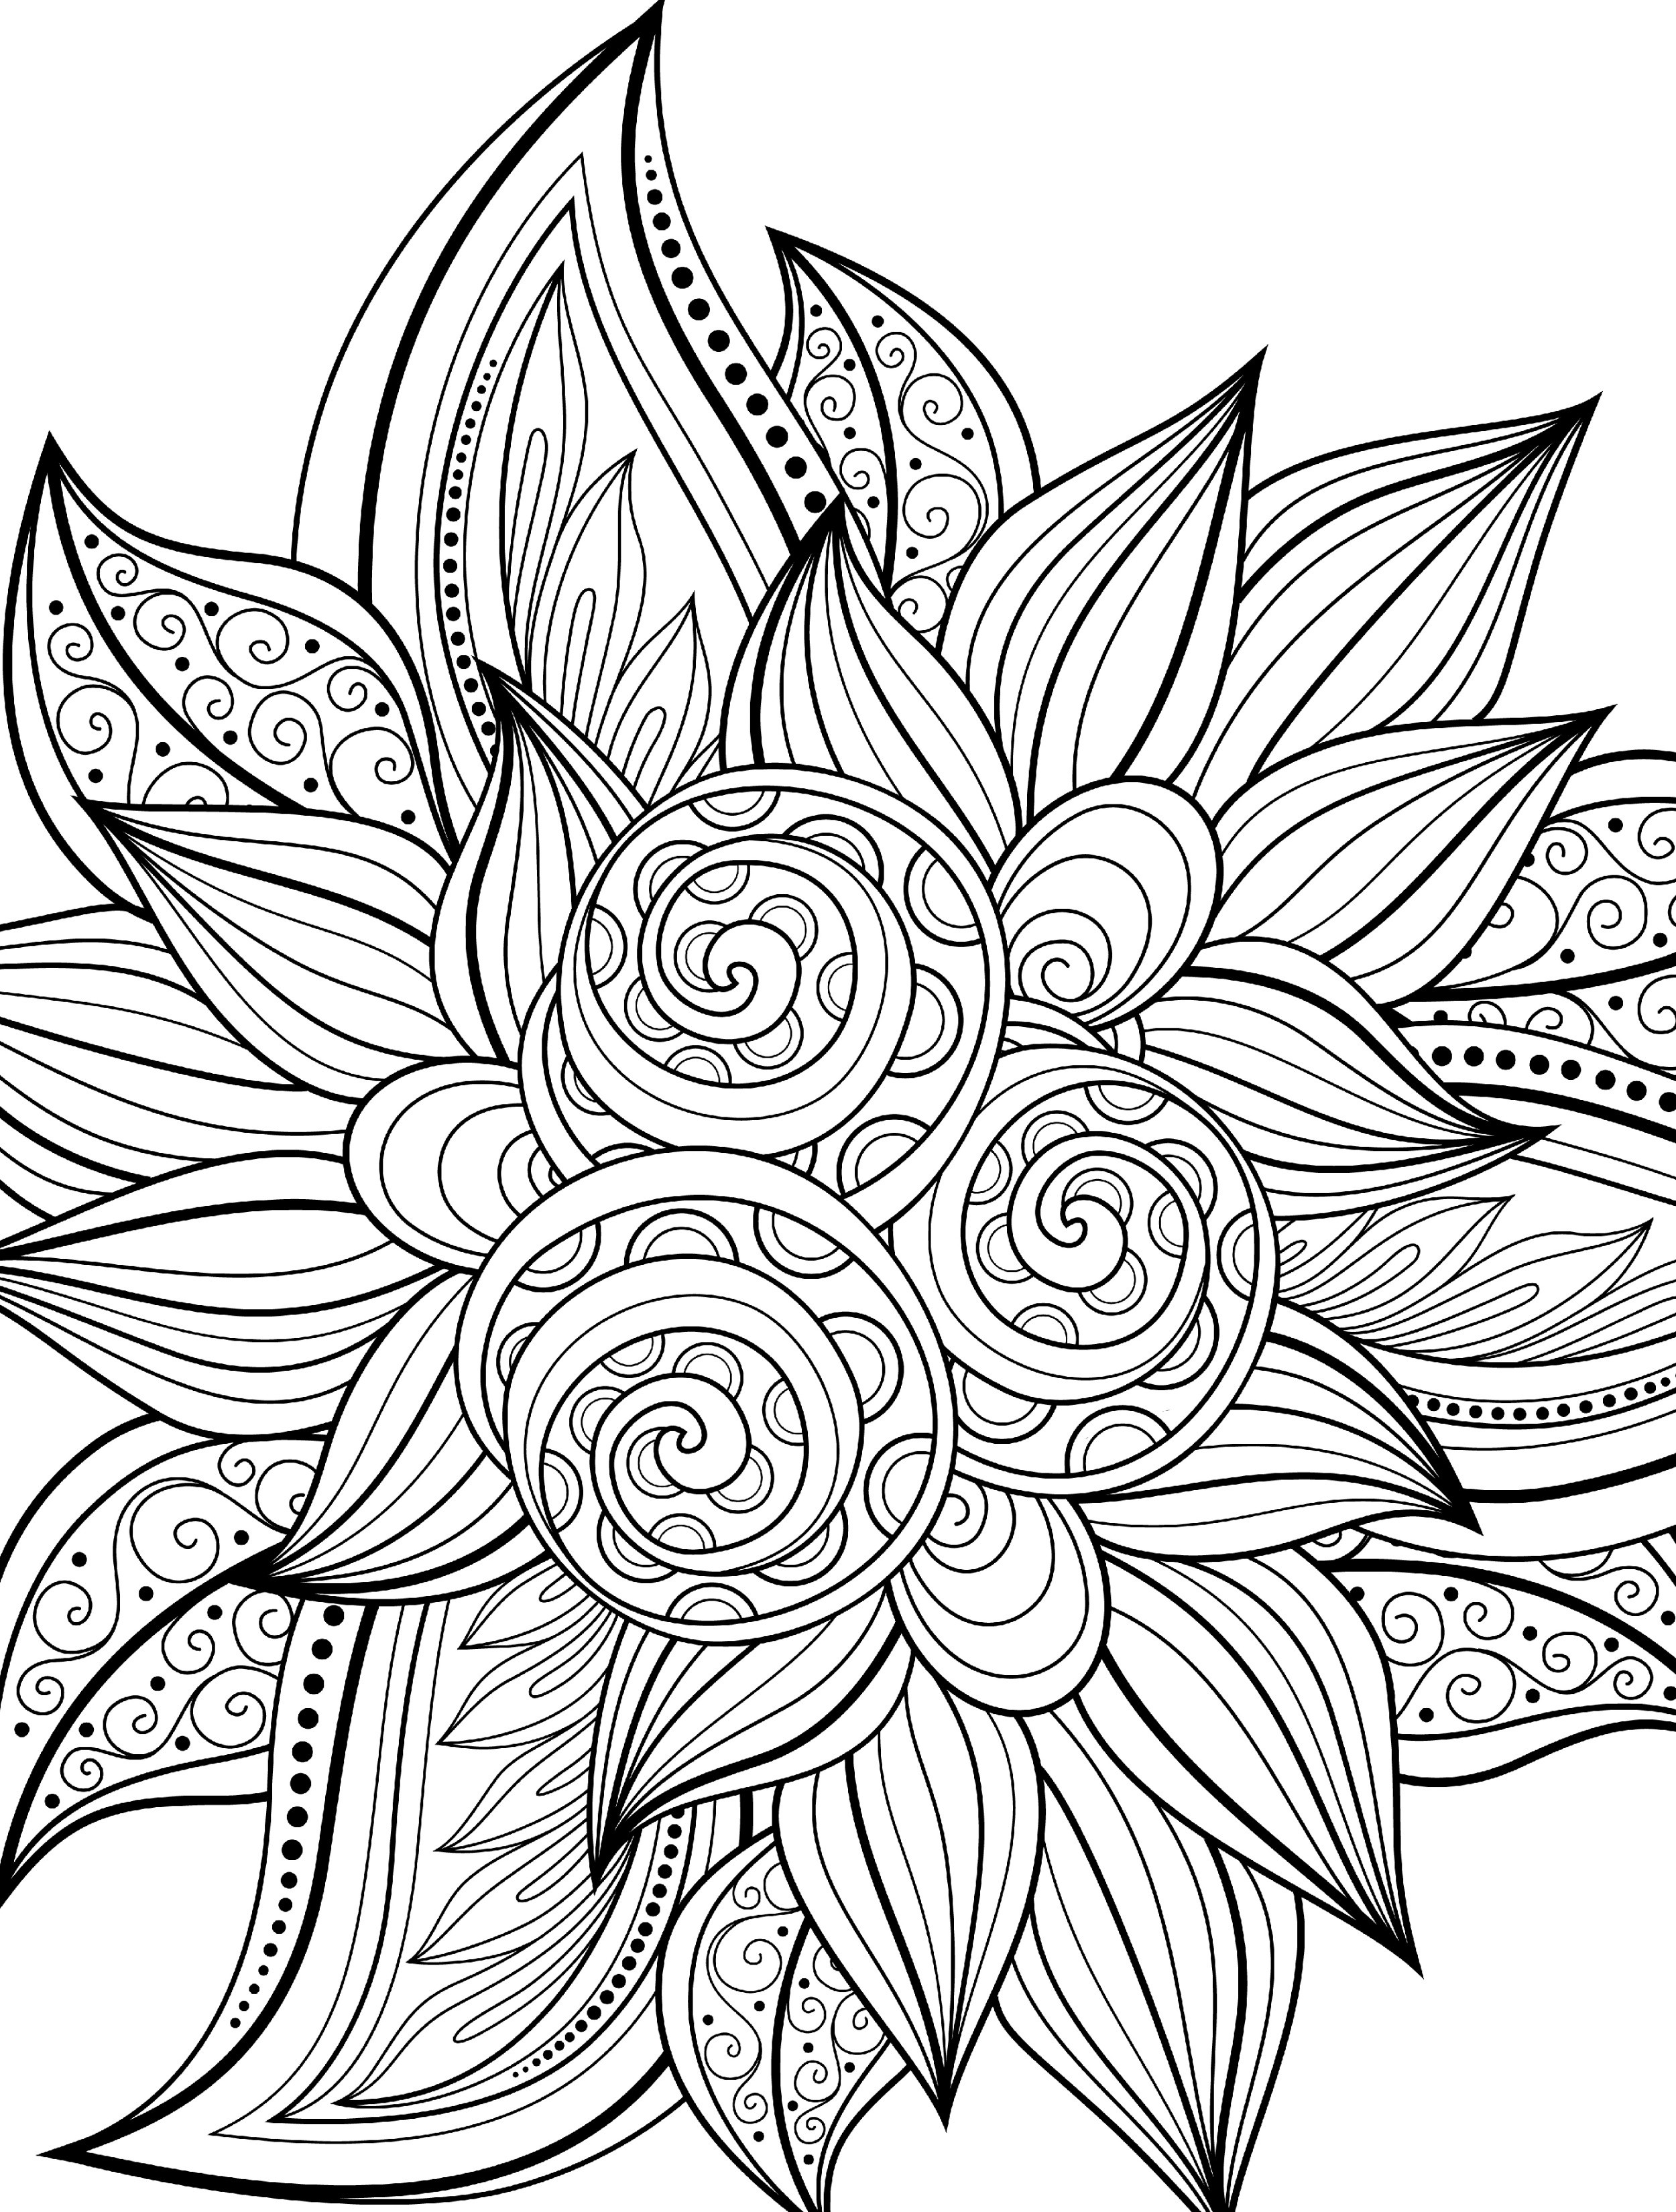 Adult Printable Coloring Pages
 10 Free Printable Holiday Adult Coloring Pages